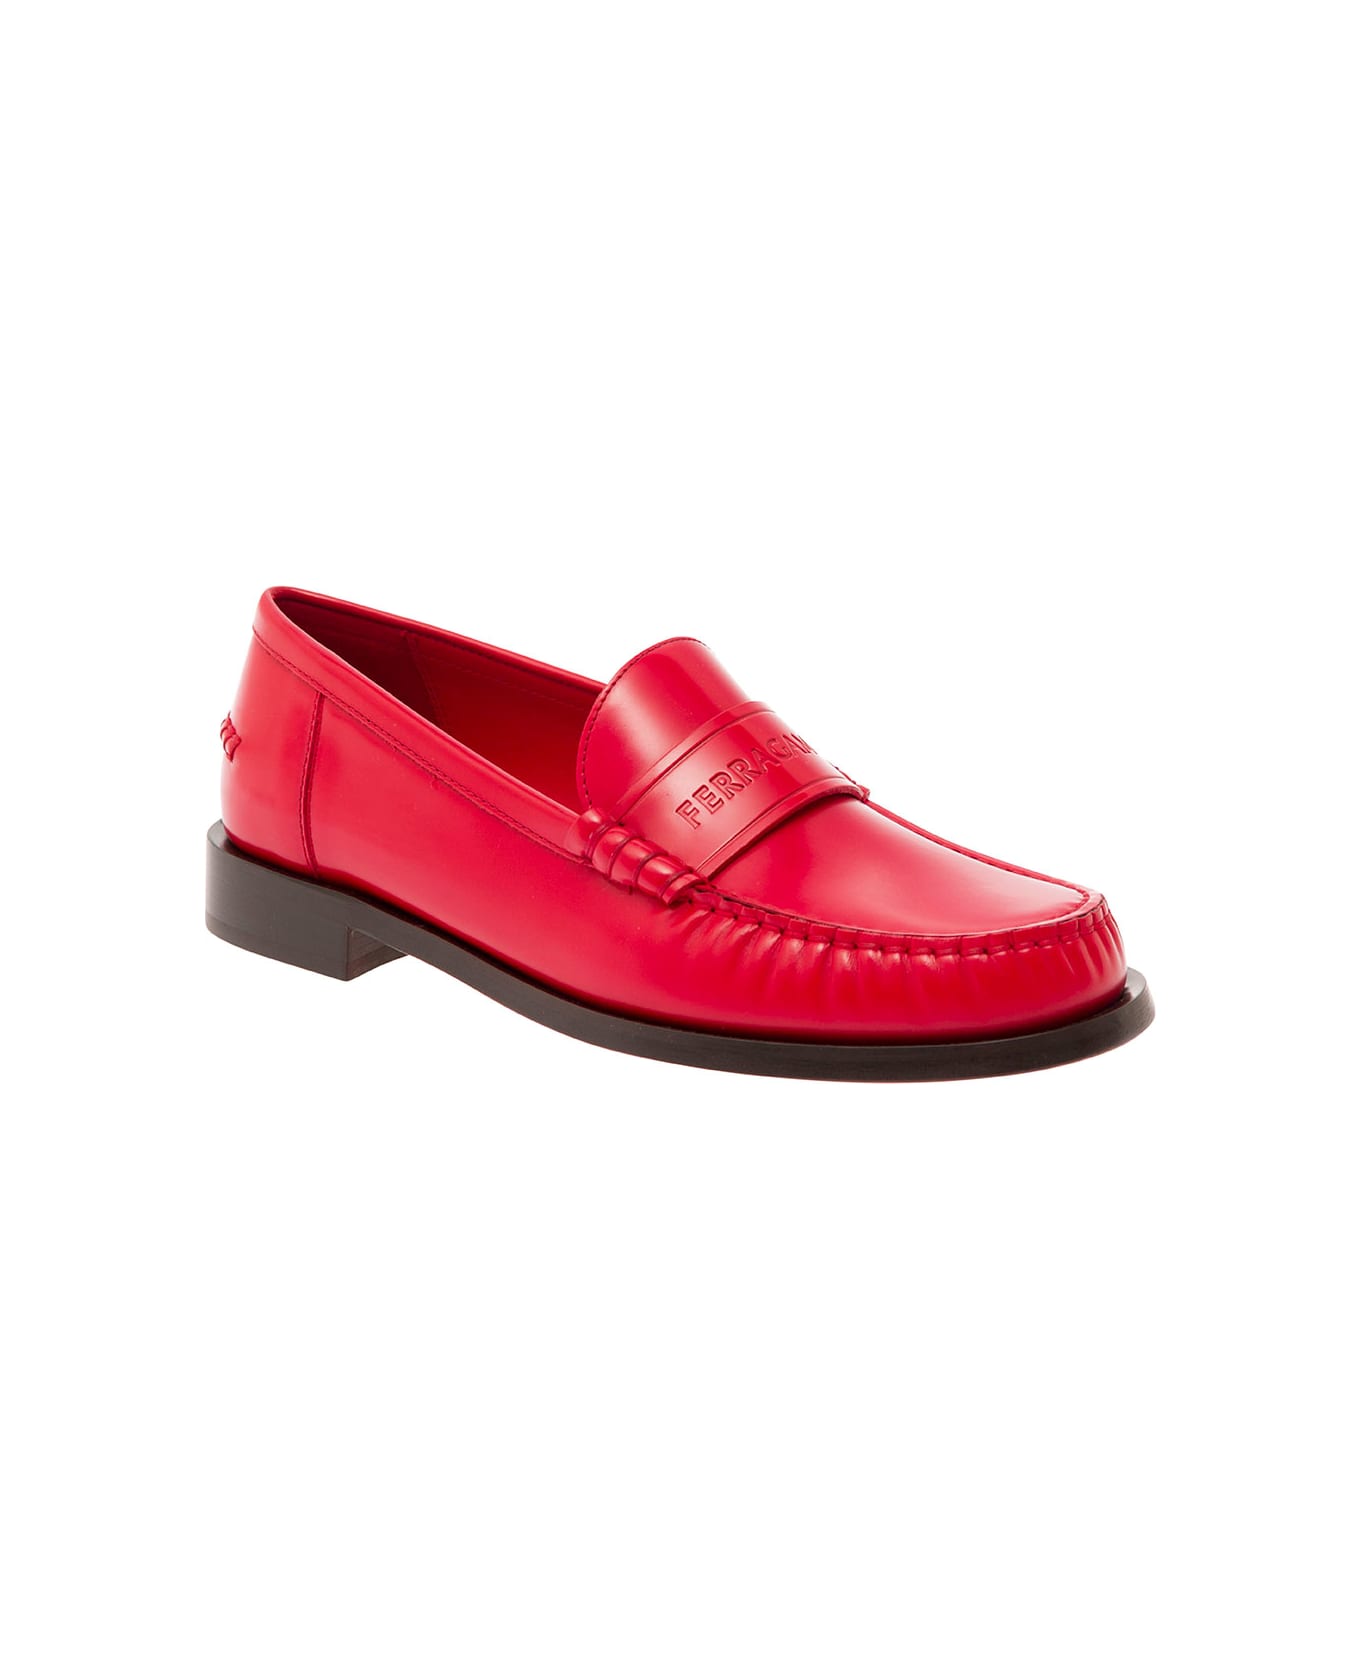 Ferragamo Red Loafers With Embossed Logo In Smooth Leather Woman - Red